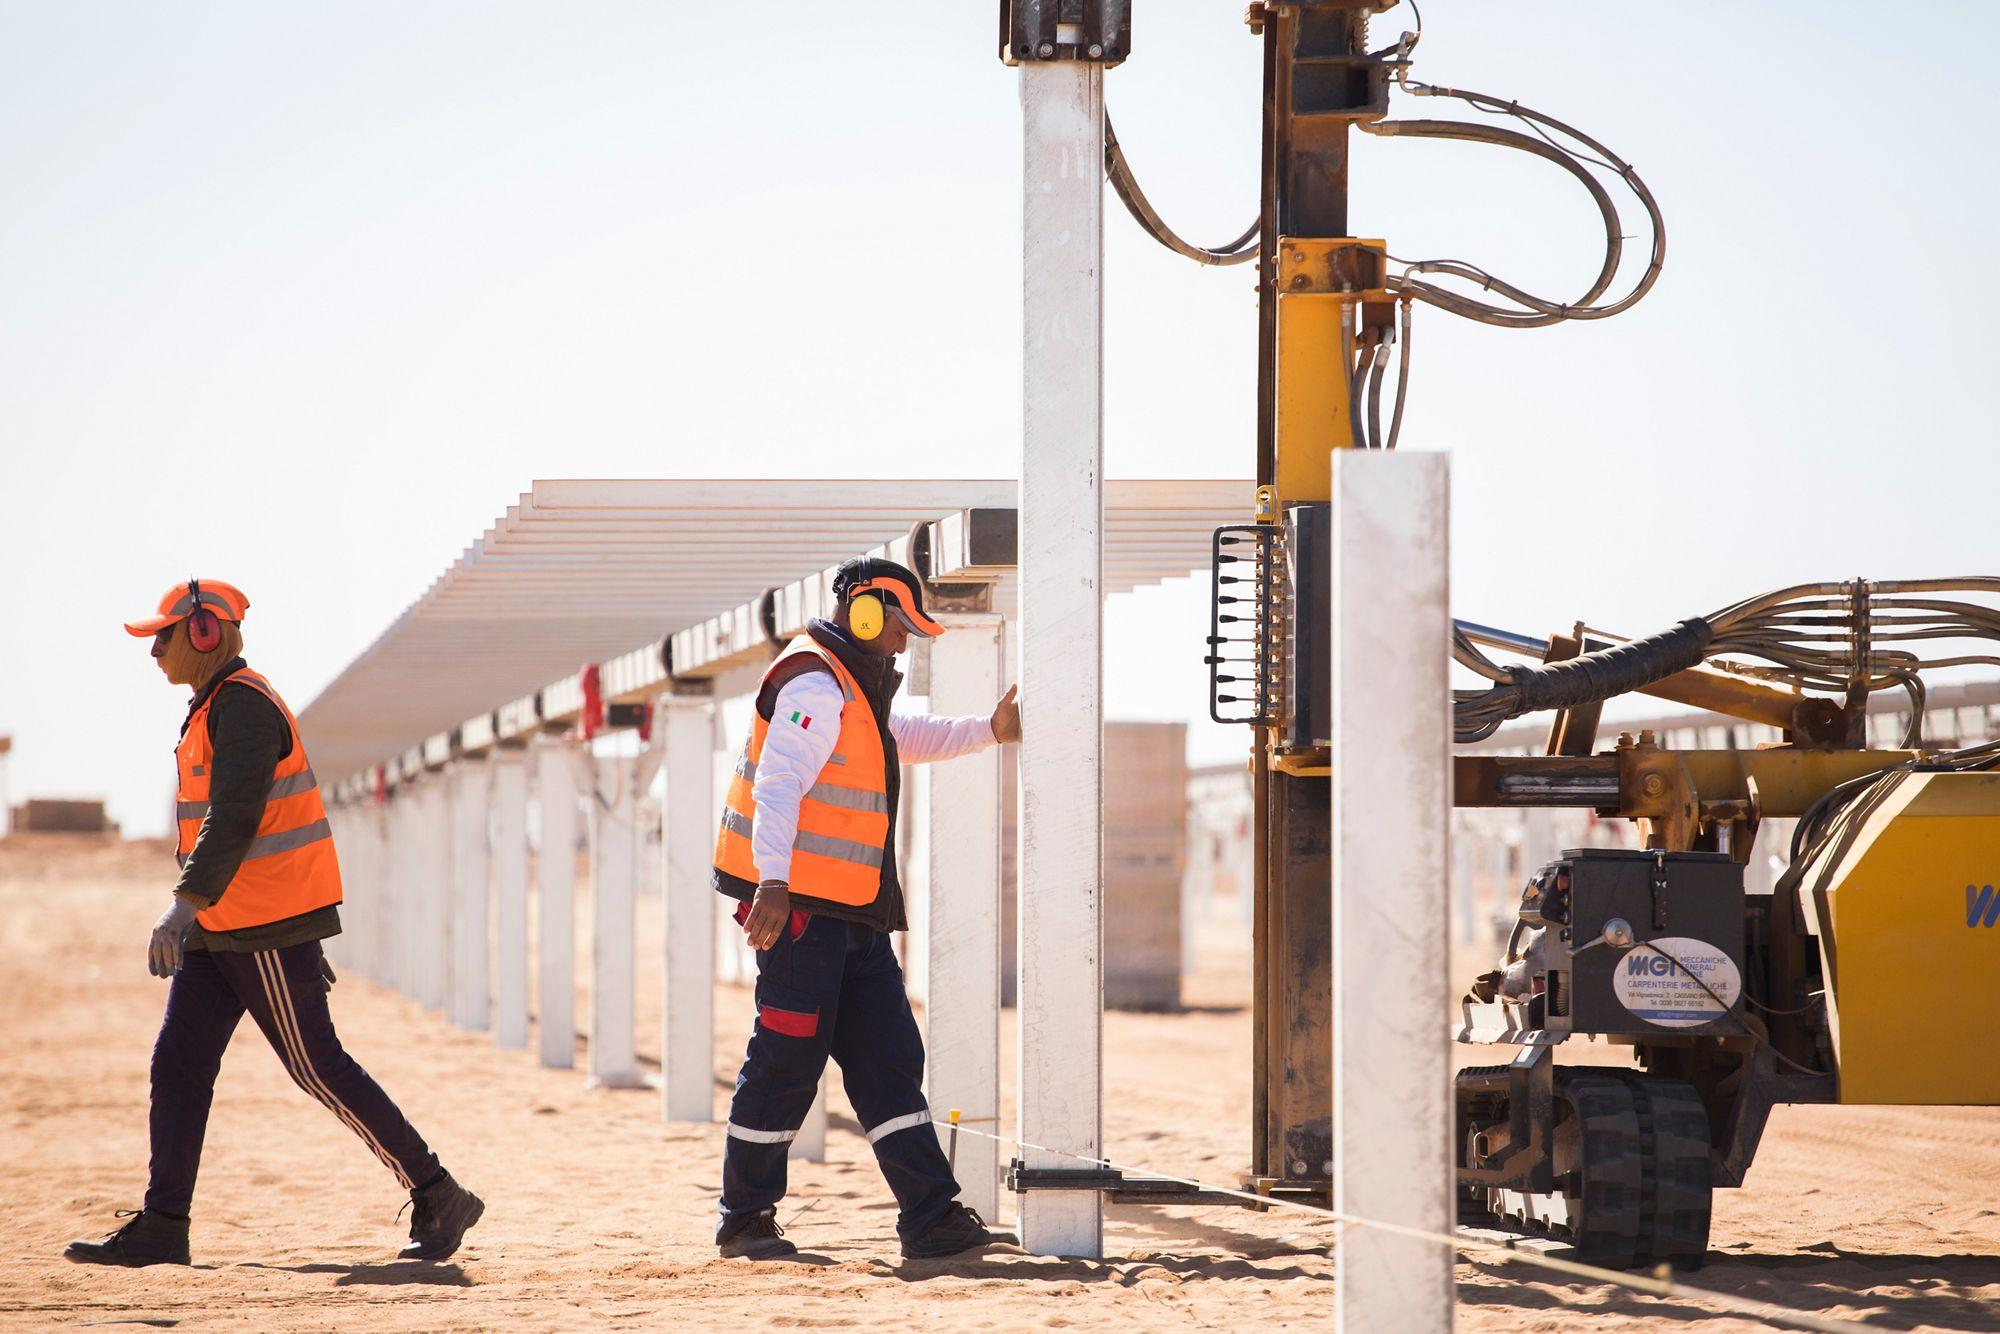 Teatek workers using a ramming machine as they install the metal posts, in the Benban Solar Park in Benban, Egypt on December 11, 2018. Photo © Dominic Chavez/International Finance Corporation